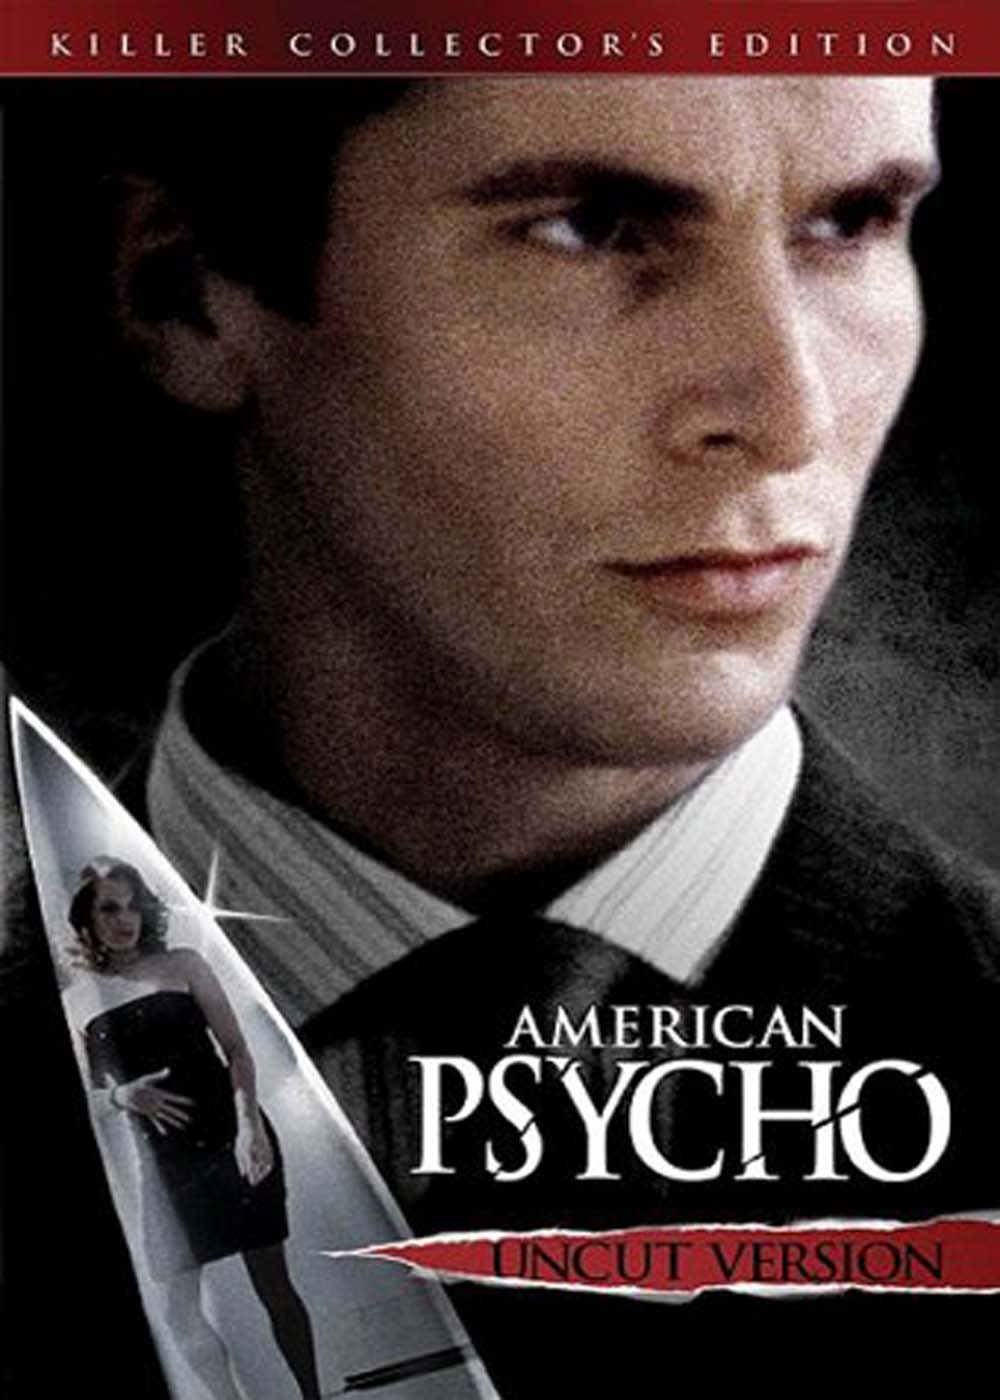 Irvine Welsh – American Psycho is a modern classic